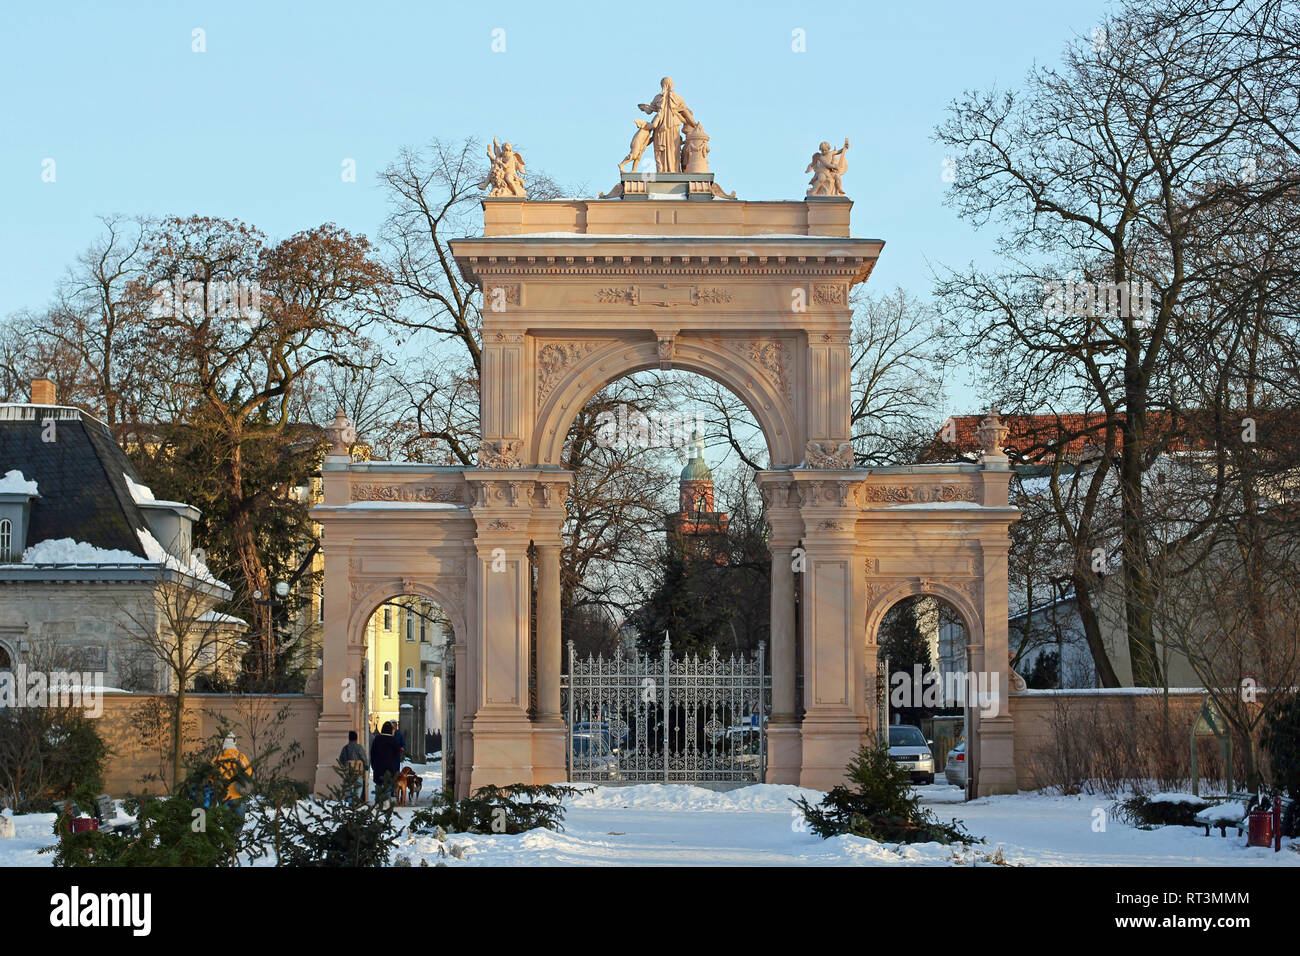 Portal and castellan house of the snow-covered municipal park in Pankow in Berlin Stock Photo